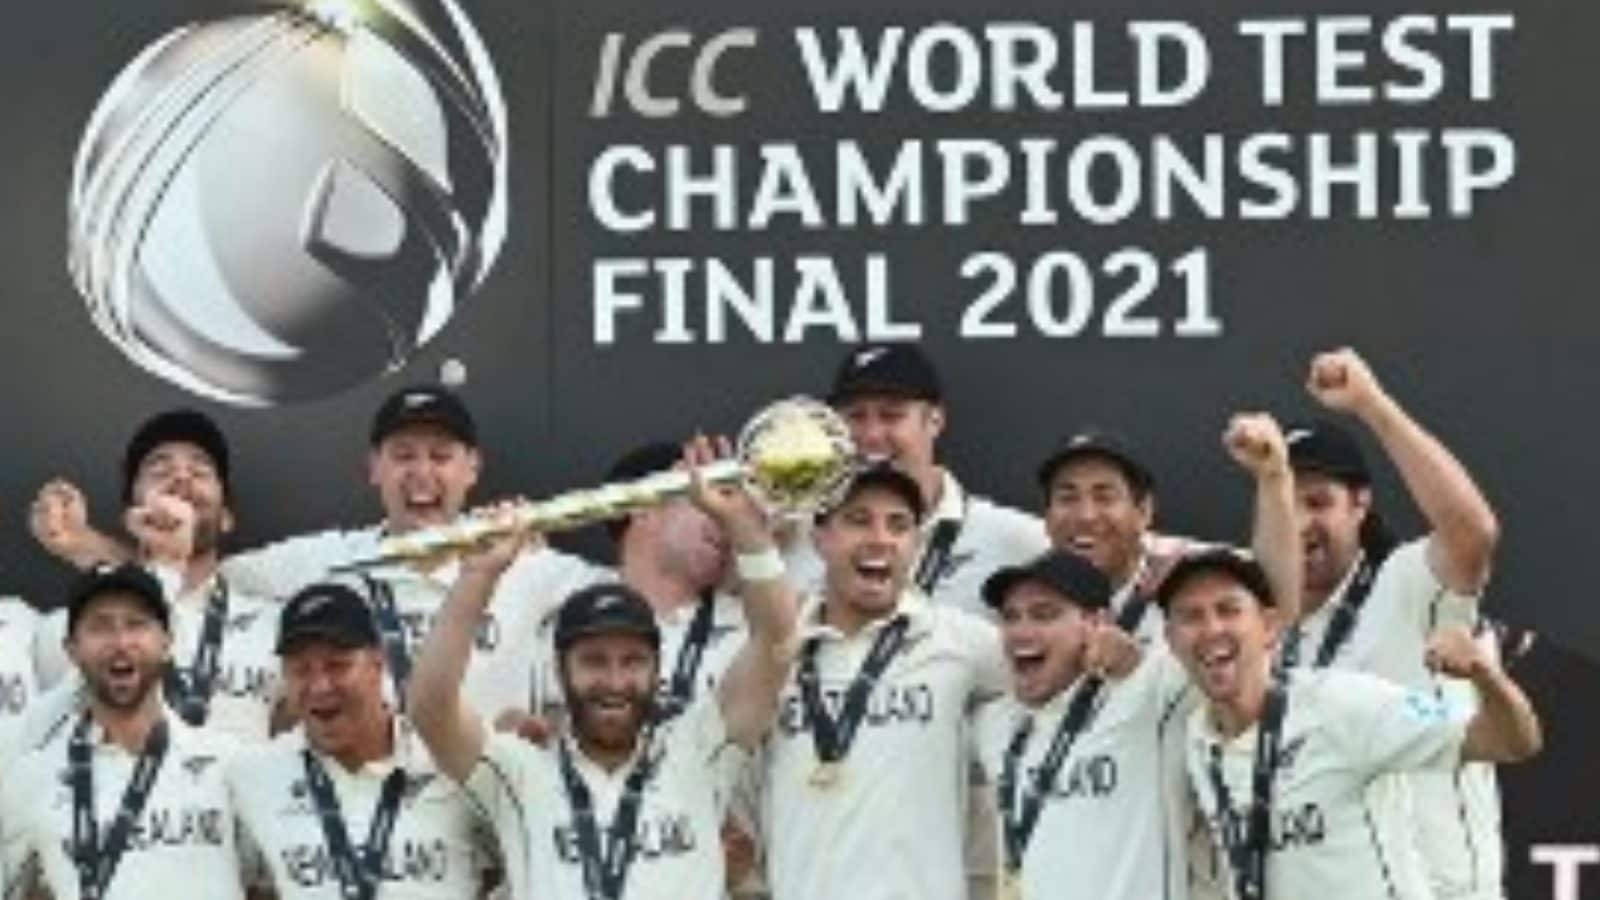 ICC Confirms Host Venues For World Test Championship 2023 And 2025 Finals